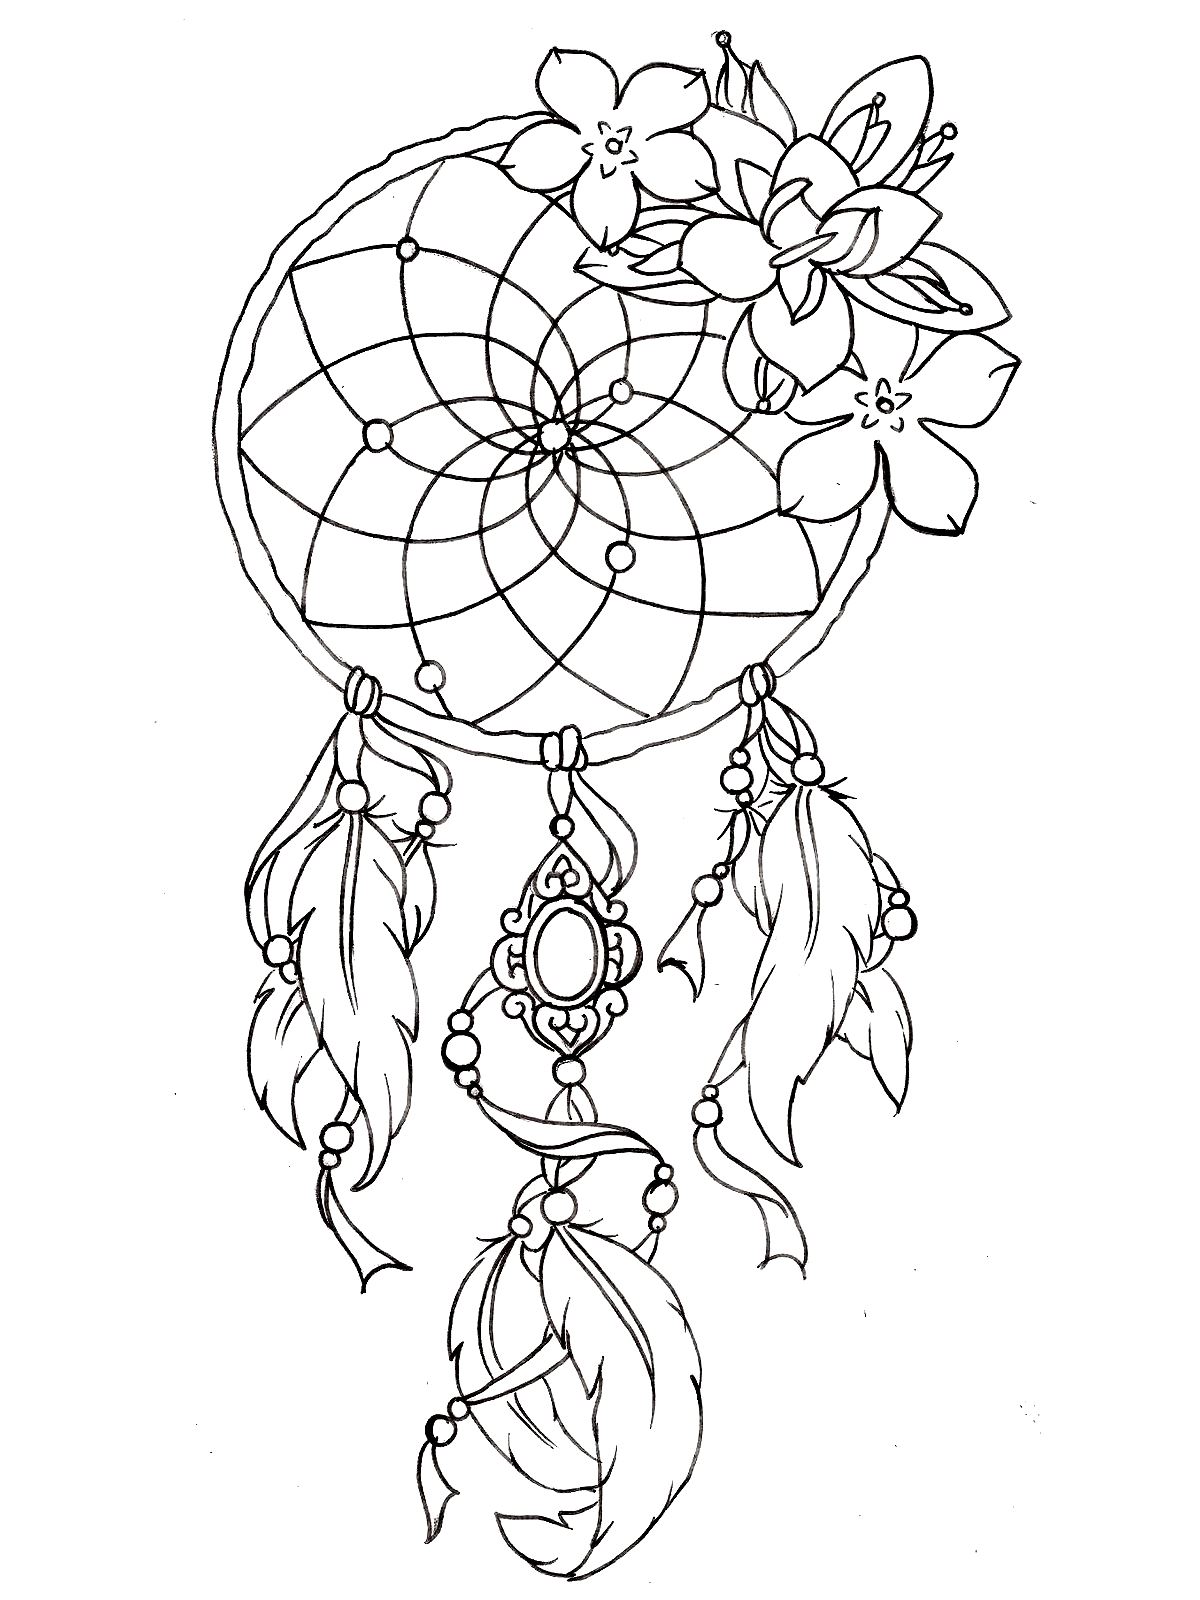 Dreamcatcher tattoo designs - Tattoos Adult Coloring Pages - Page 2/